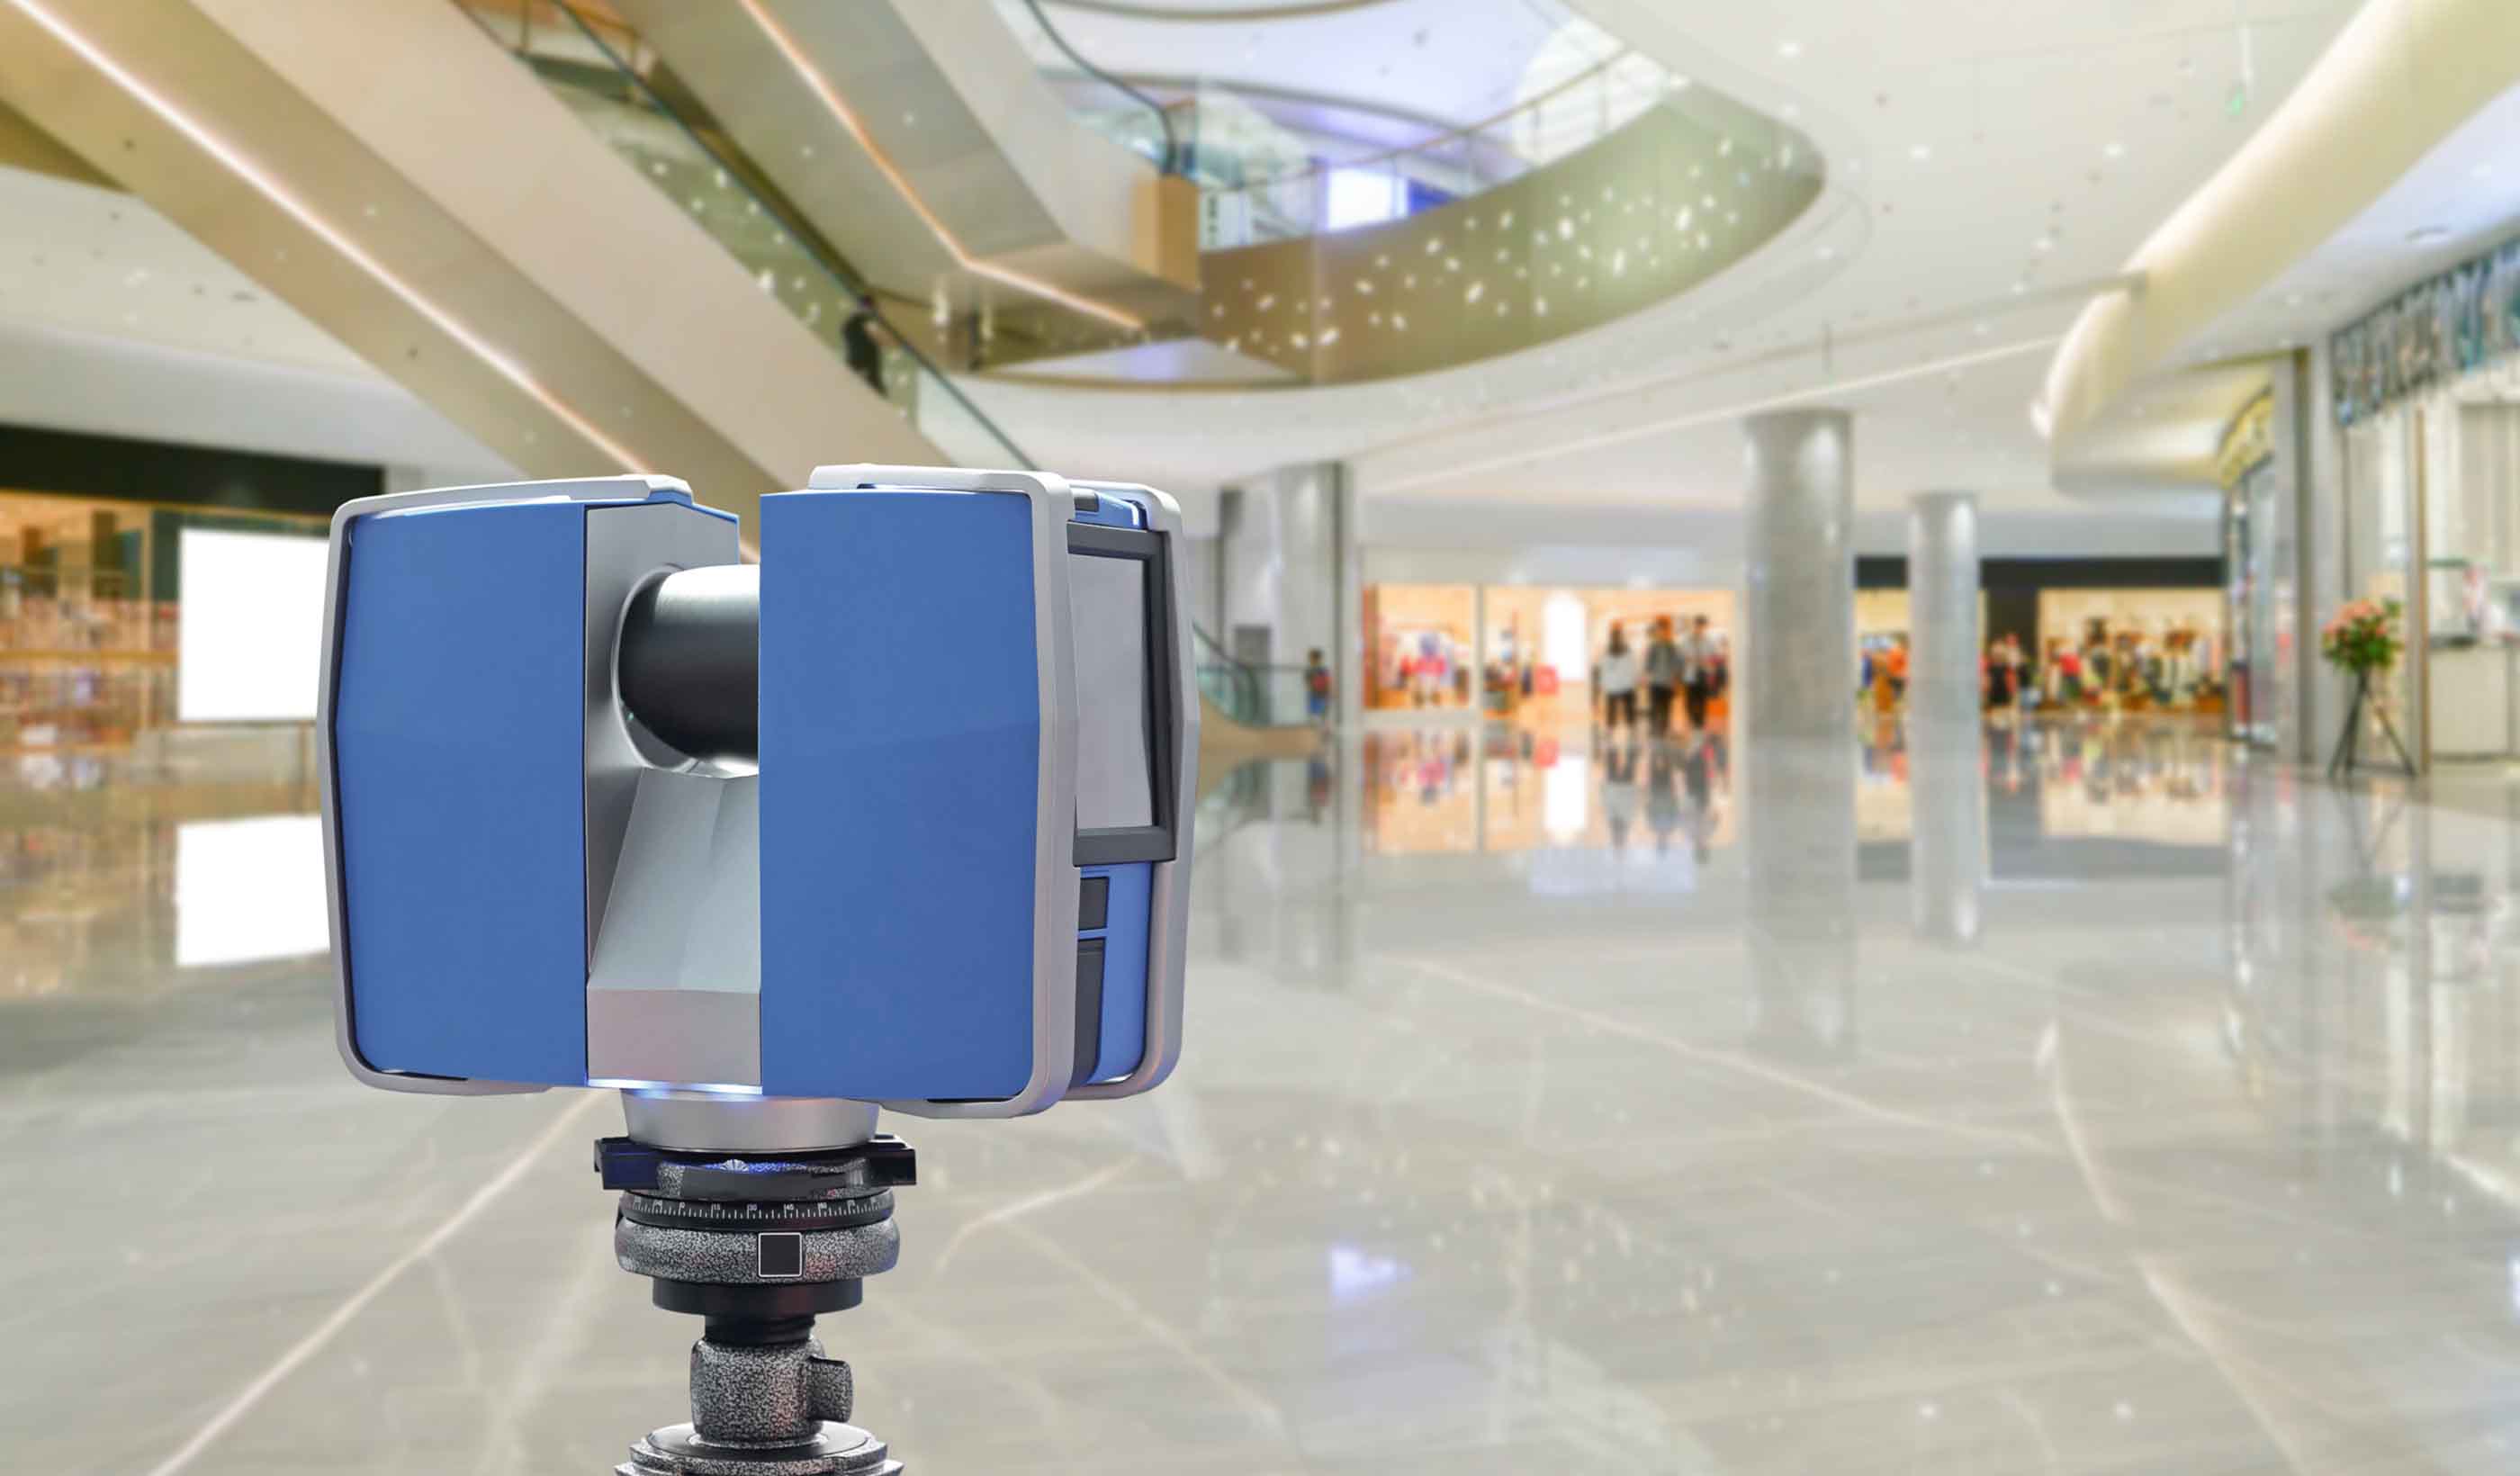 How to turn shopping malls into a physical and virtual retail world